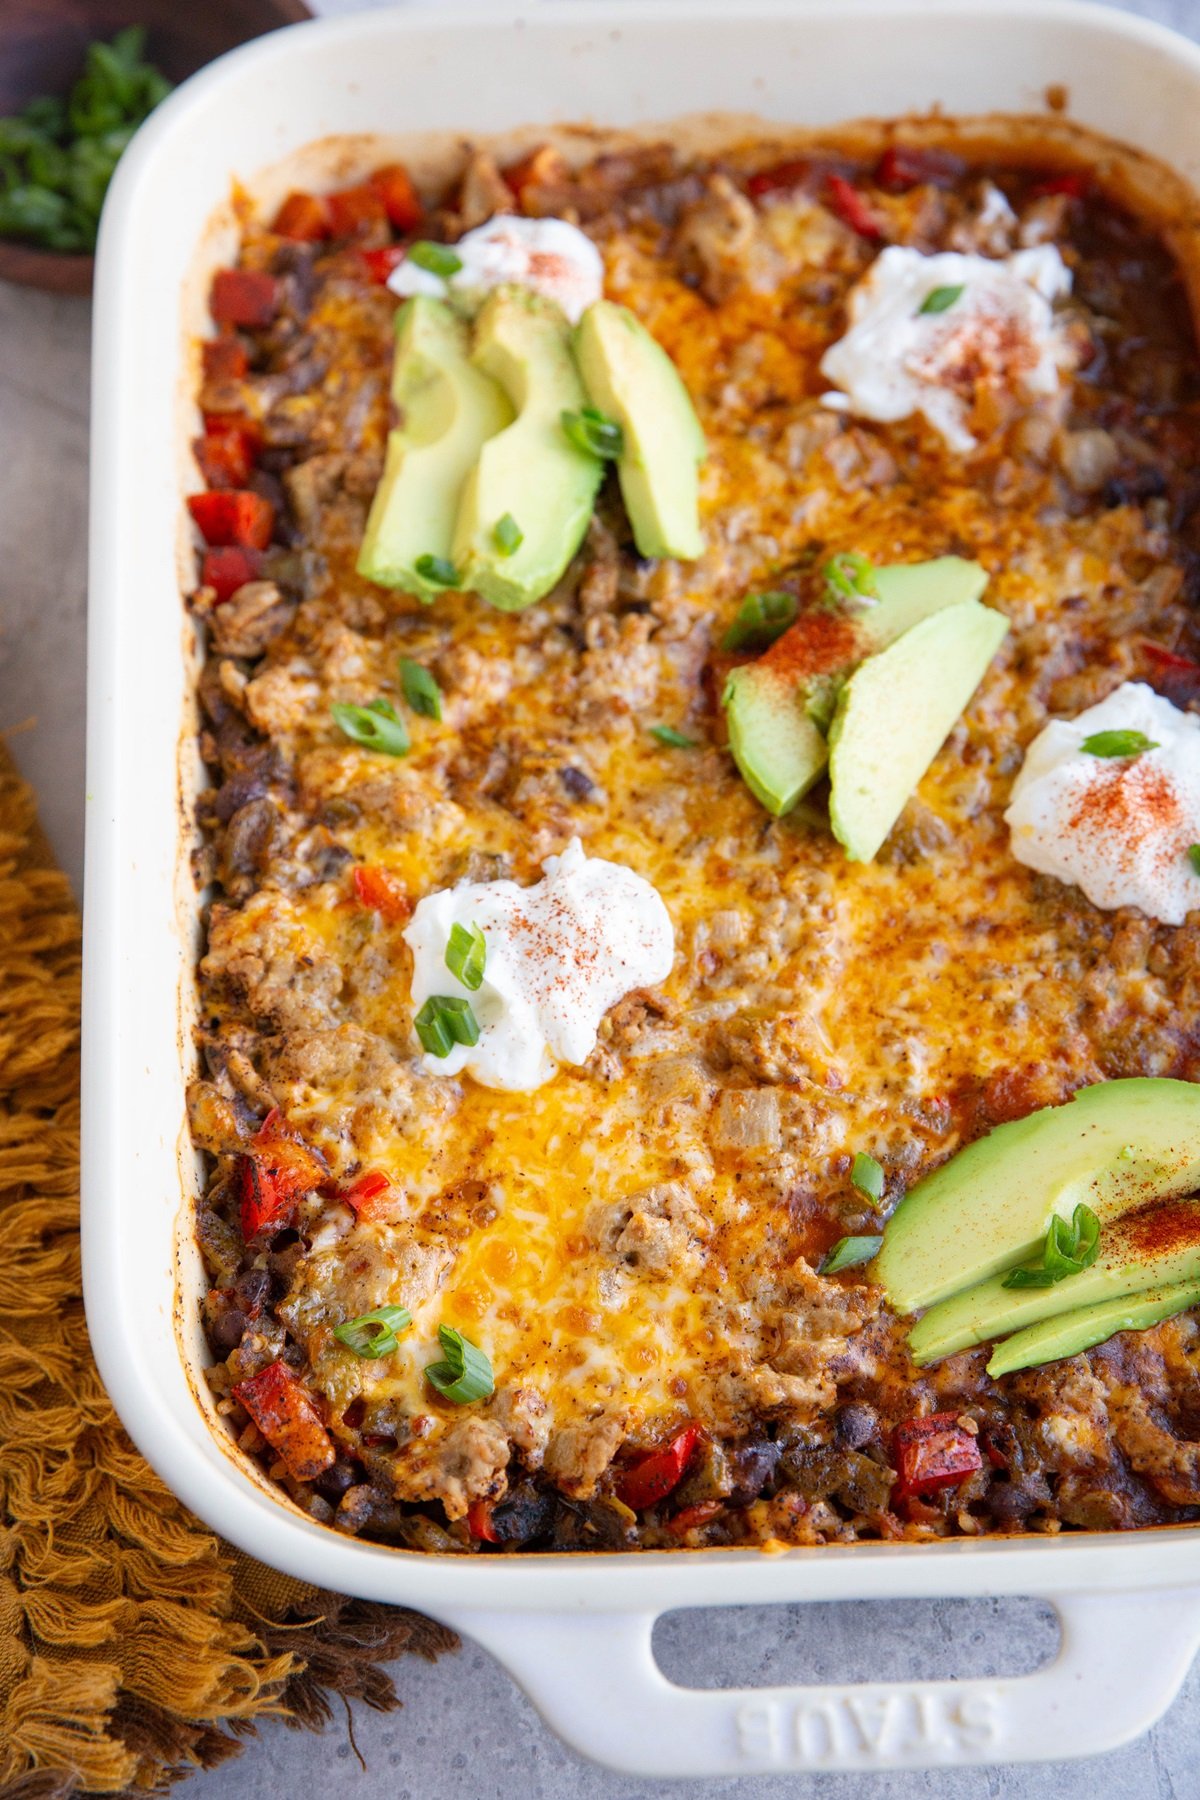 Casserole dish with cheesy turkey taco casserole, topped with slices of avocado and sour cream.